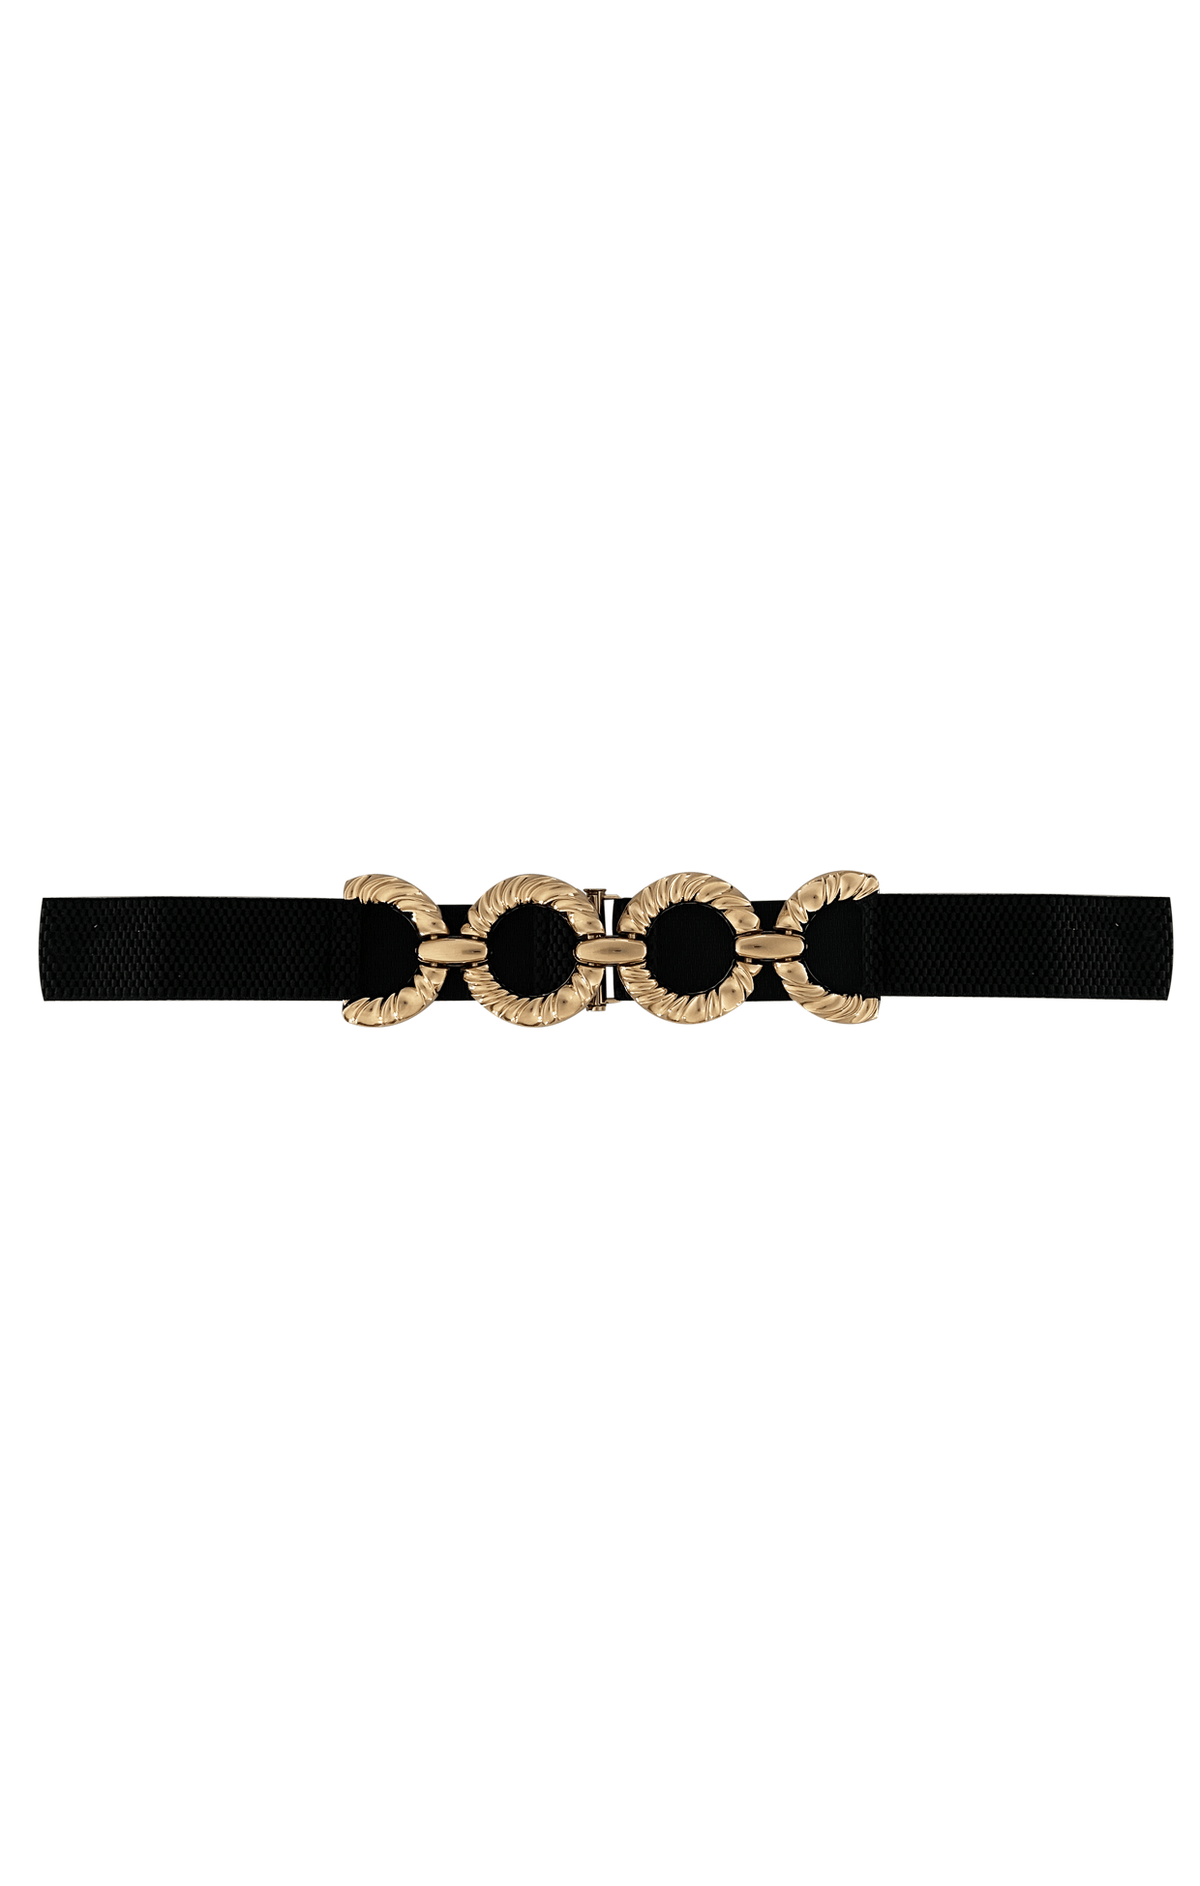 ACCESSORIES Belts OS / BLACK CIRCLES PANEL FRONT STRETCH BELT IN BLACK AND GOLD